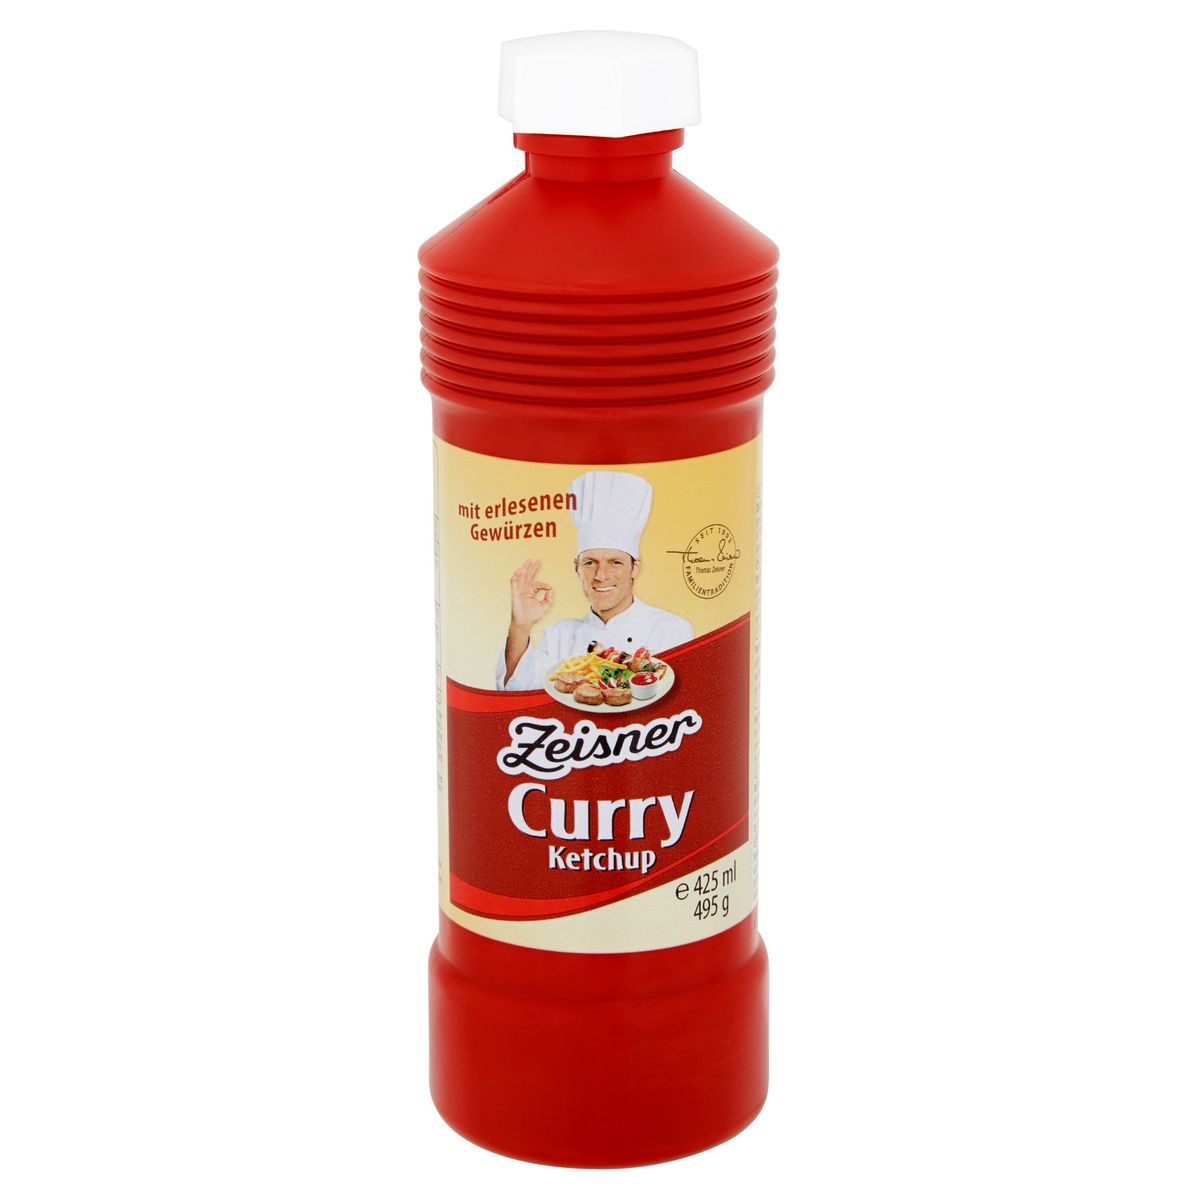 Zeisner Curry Ketchup 425 ml